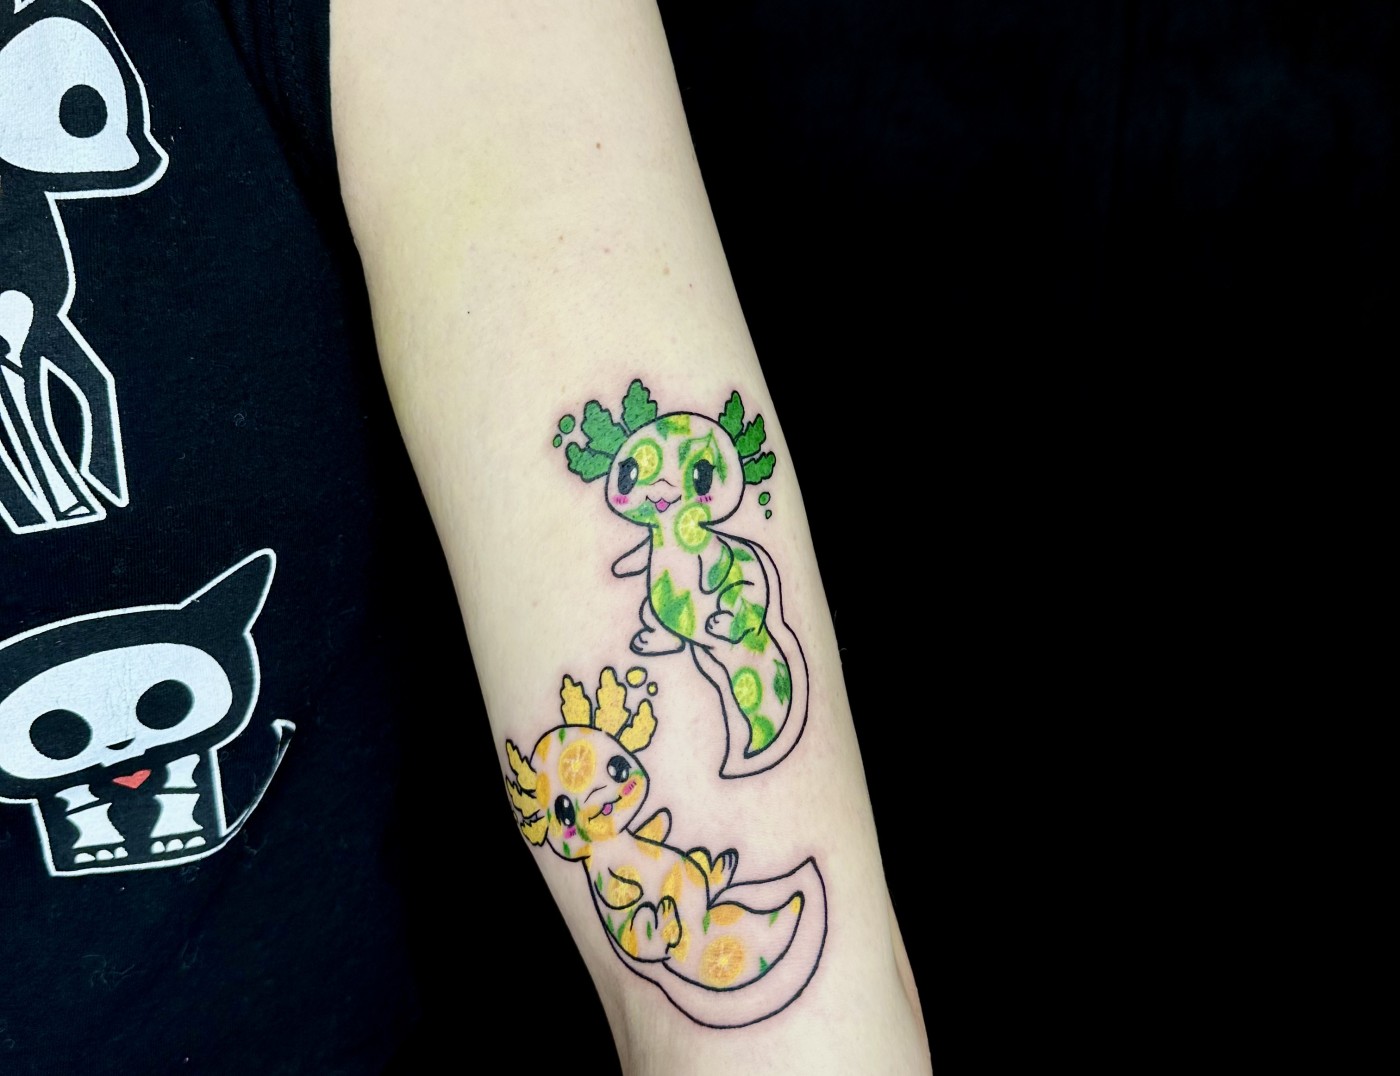 Axoioti Salamanders Animal Tattoo By Tattoo Artist Morana. Morana comes to us from Iron & Ink Tattoo Studio in Atlanta, Georgia. She is available for booking Sept 23rd - 27th. Call 404-973-7828 or stop by for a free consultation. Walk Ins are welcome.